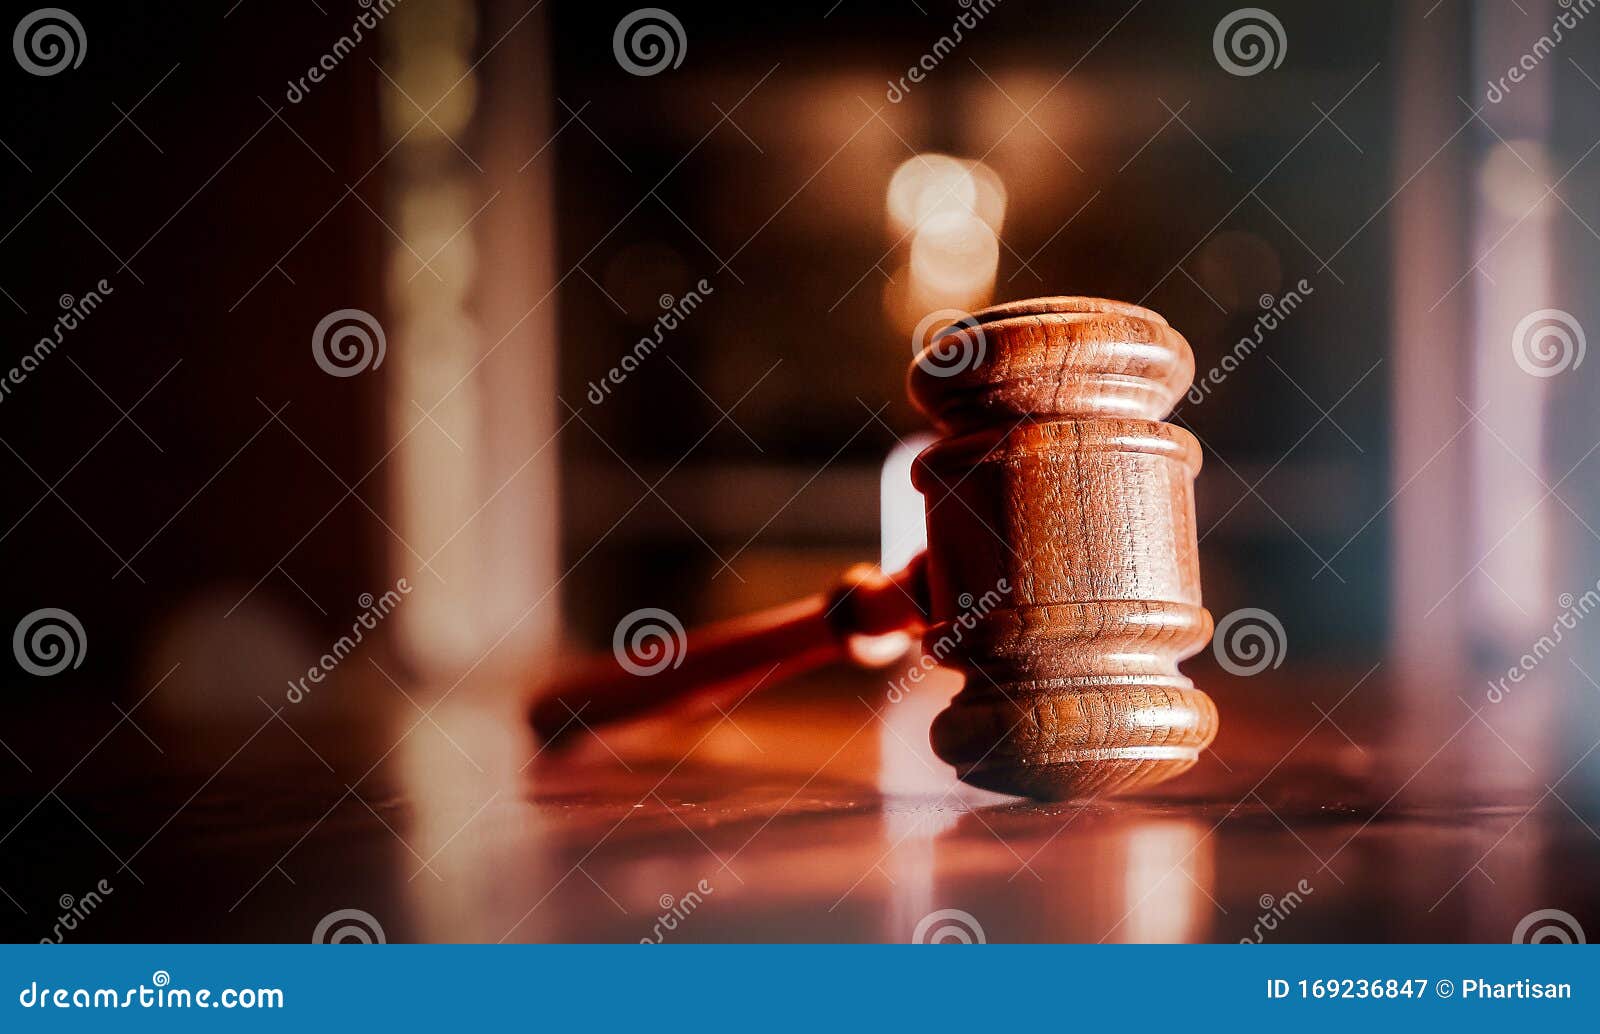 legal law books concept imagery